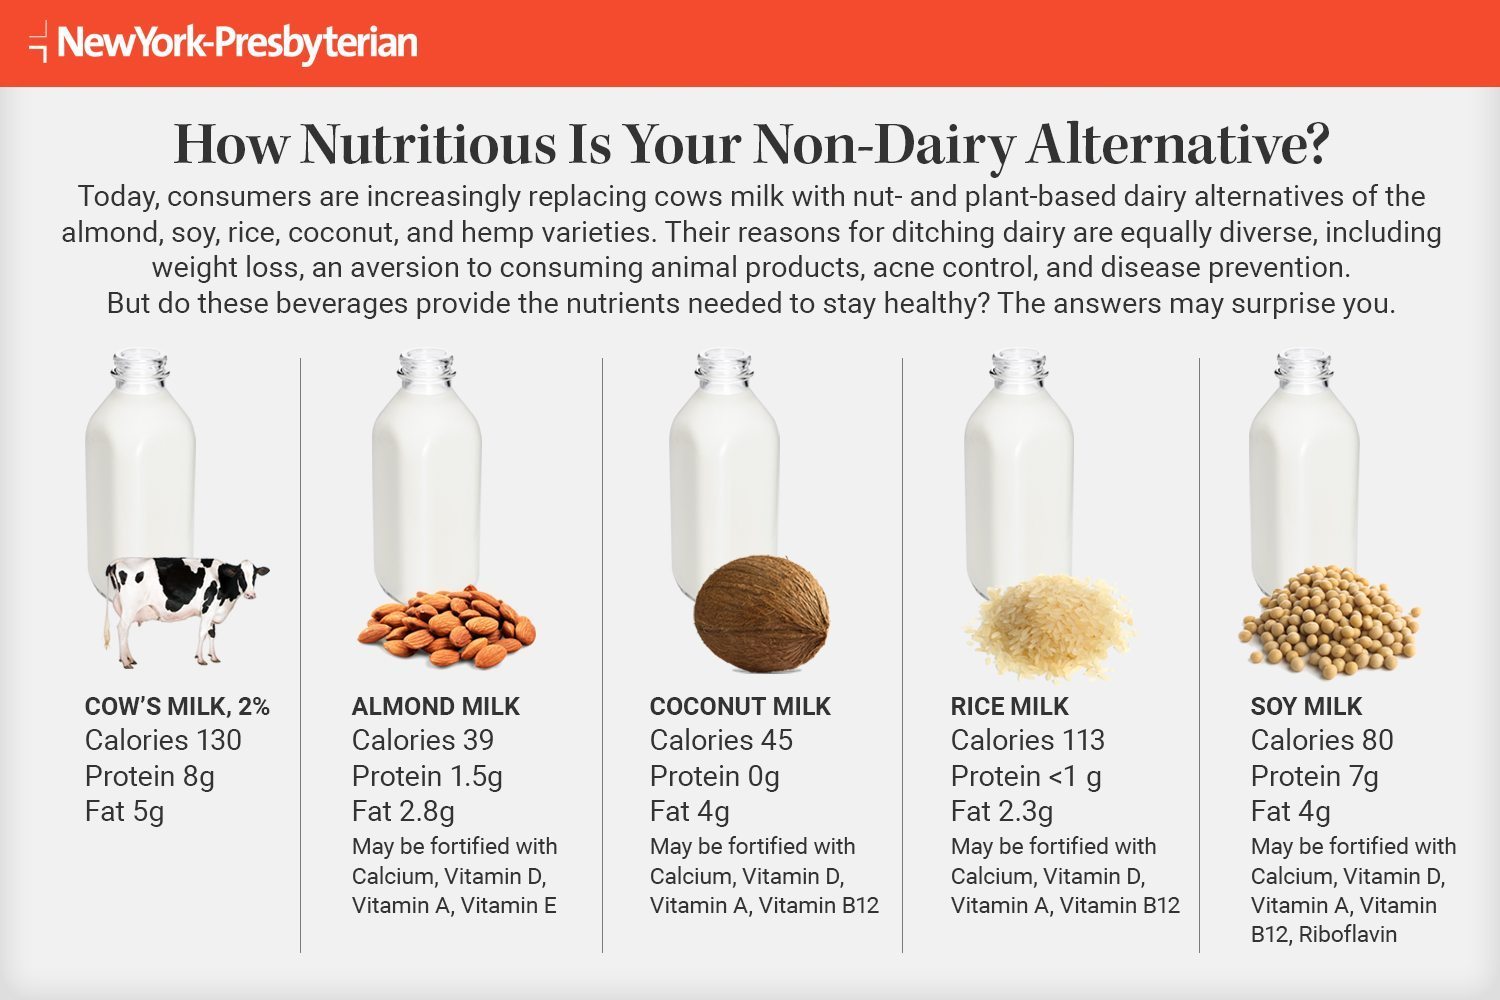 Infographic outlining nutrition facts of various non-dairy alternatives